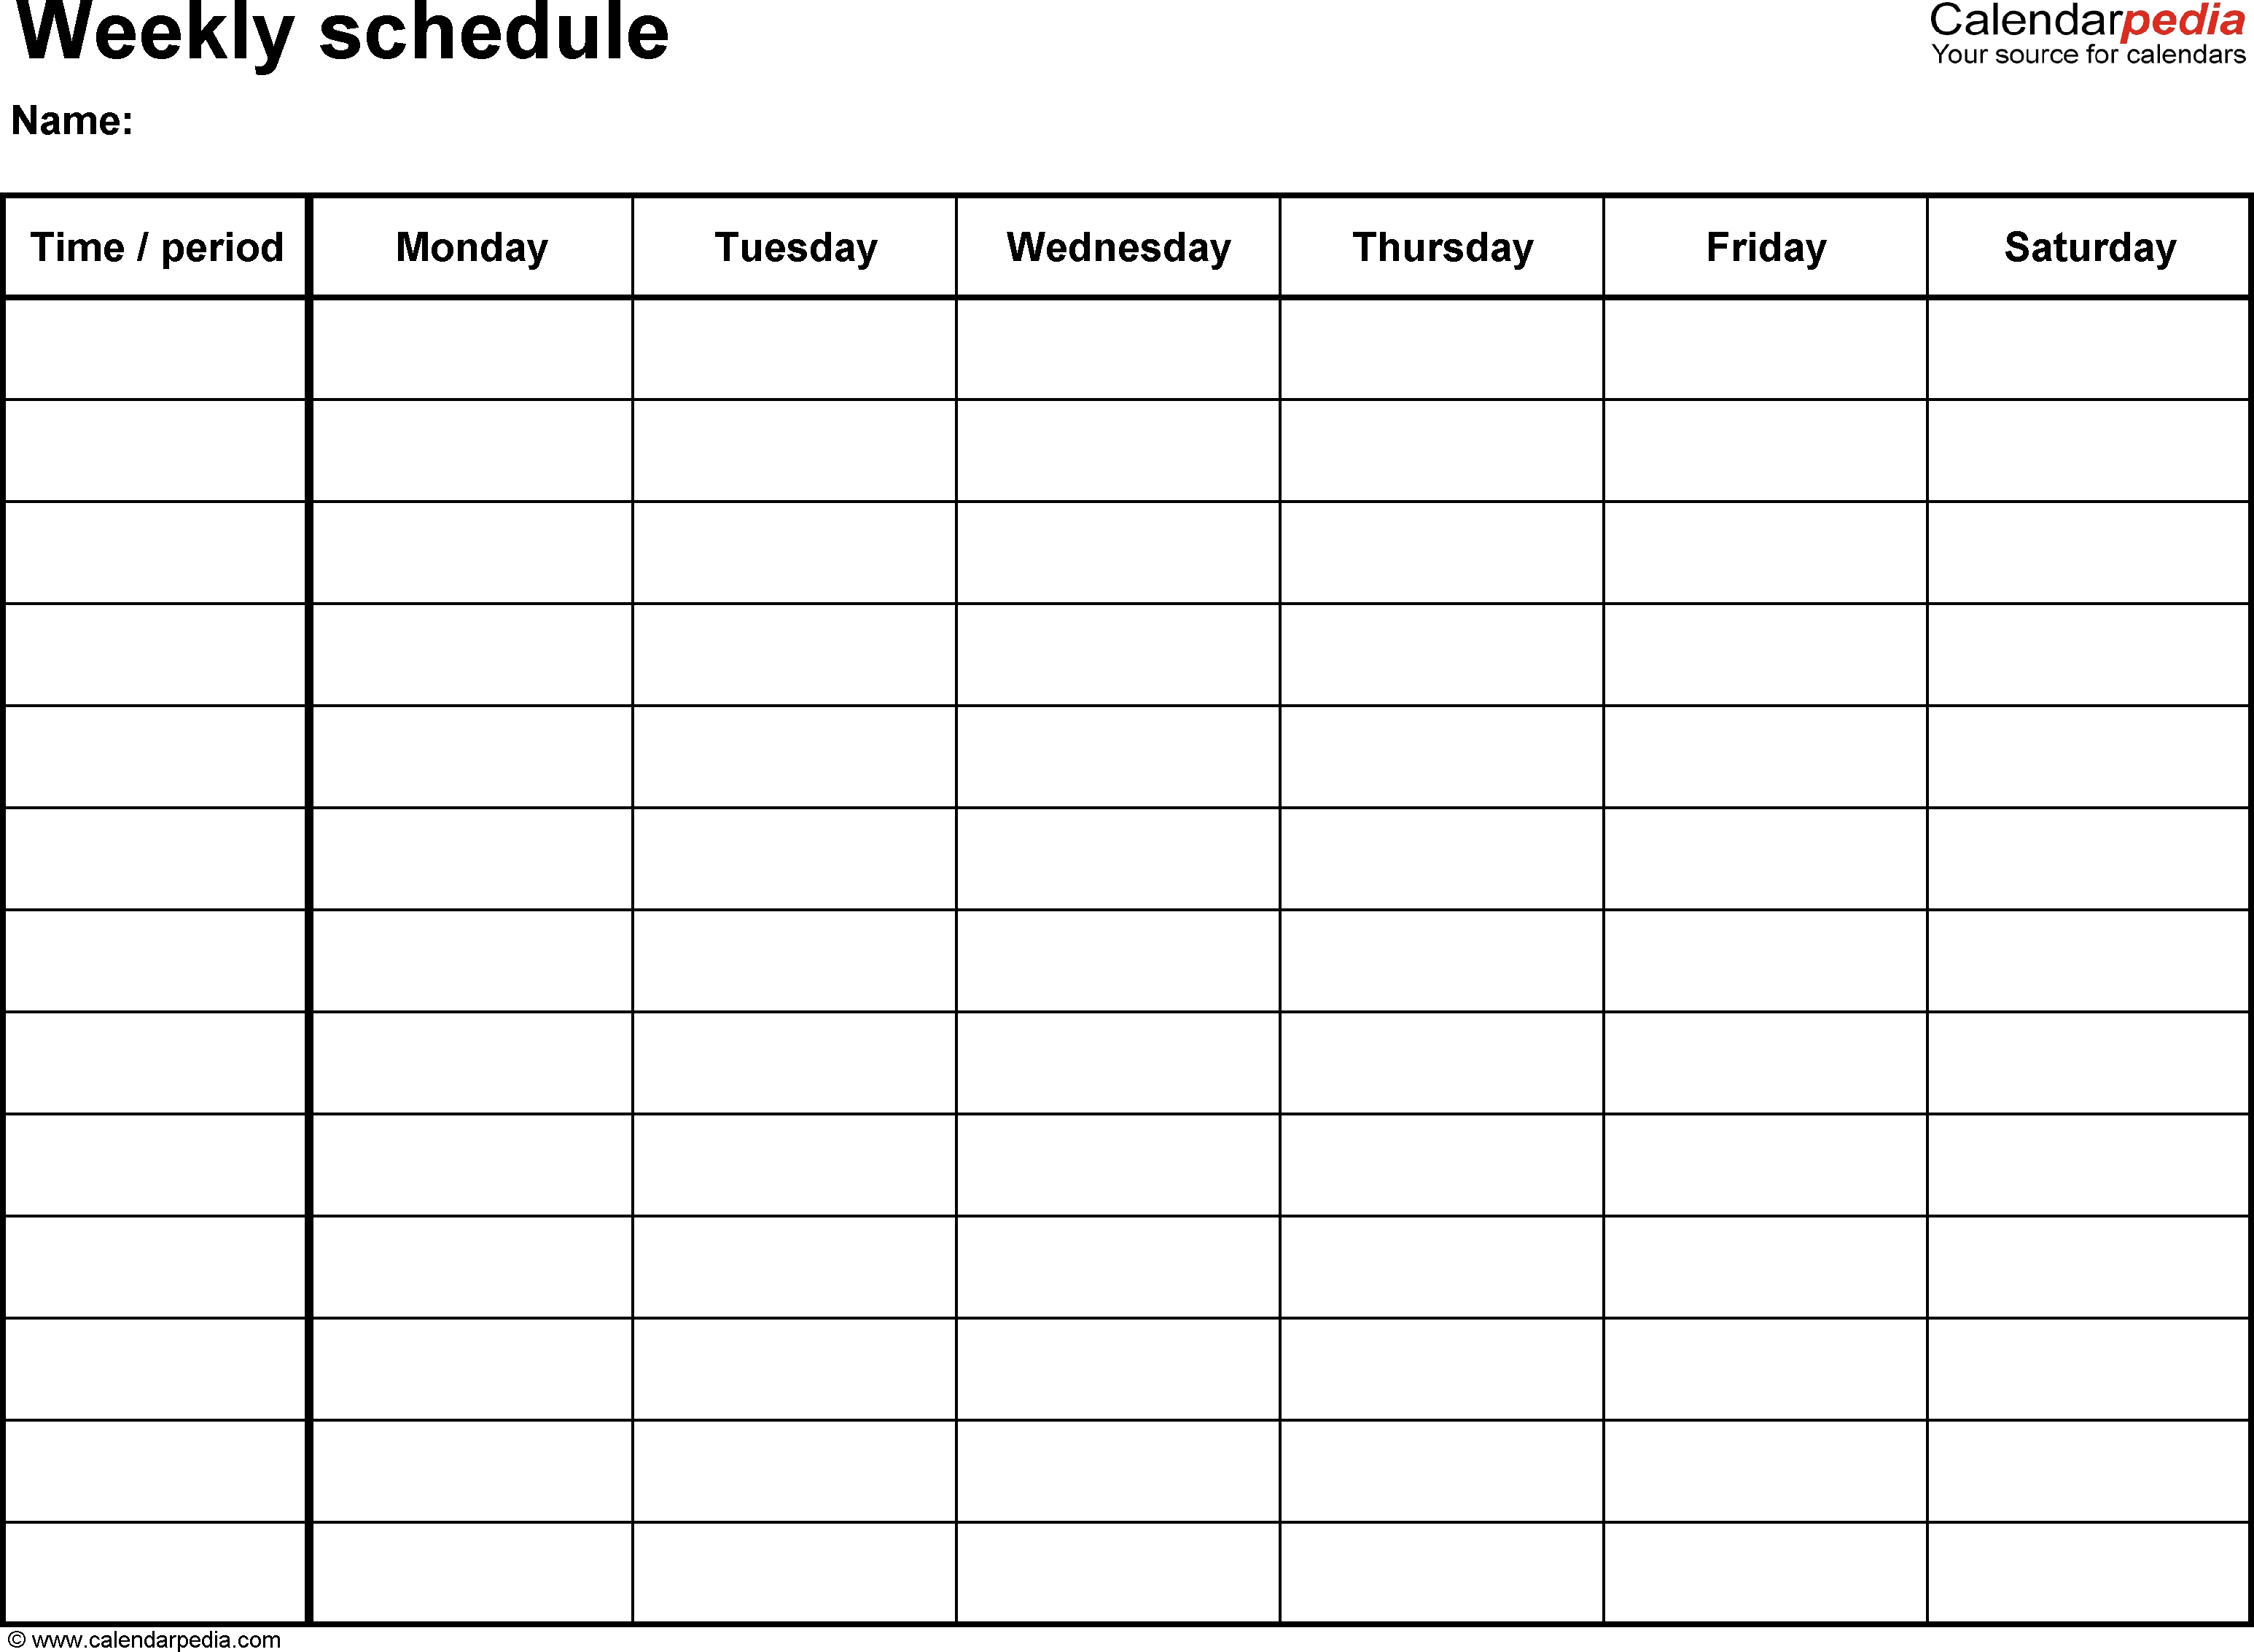 Free Weekly Schedule Templates For Word - 18 Templates regarding Weekly Planner Template For Students